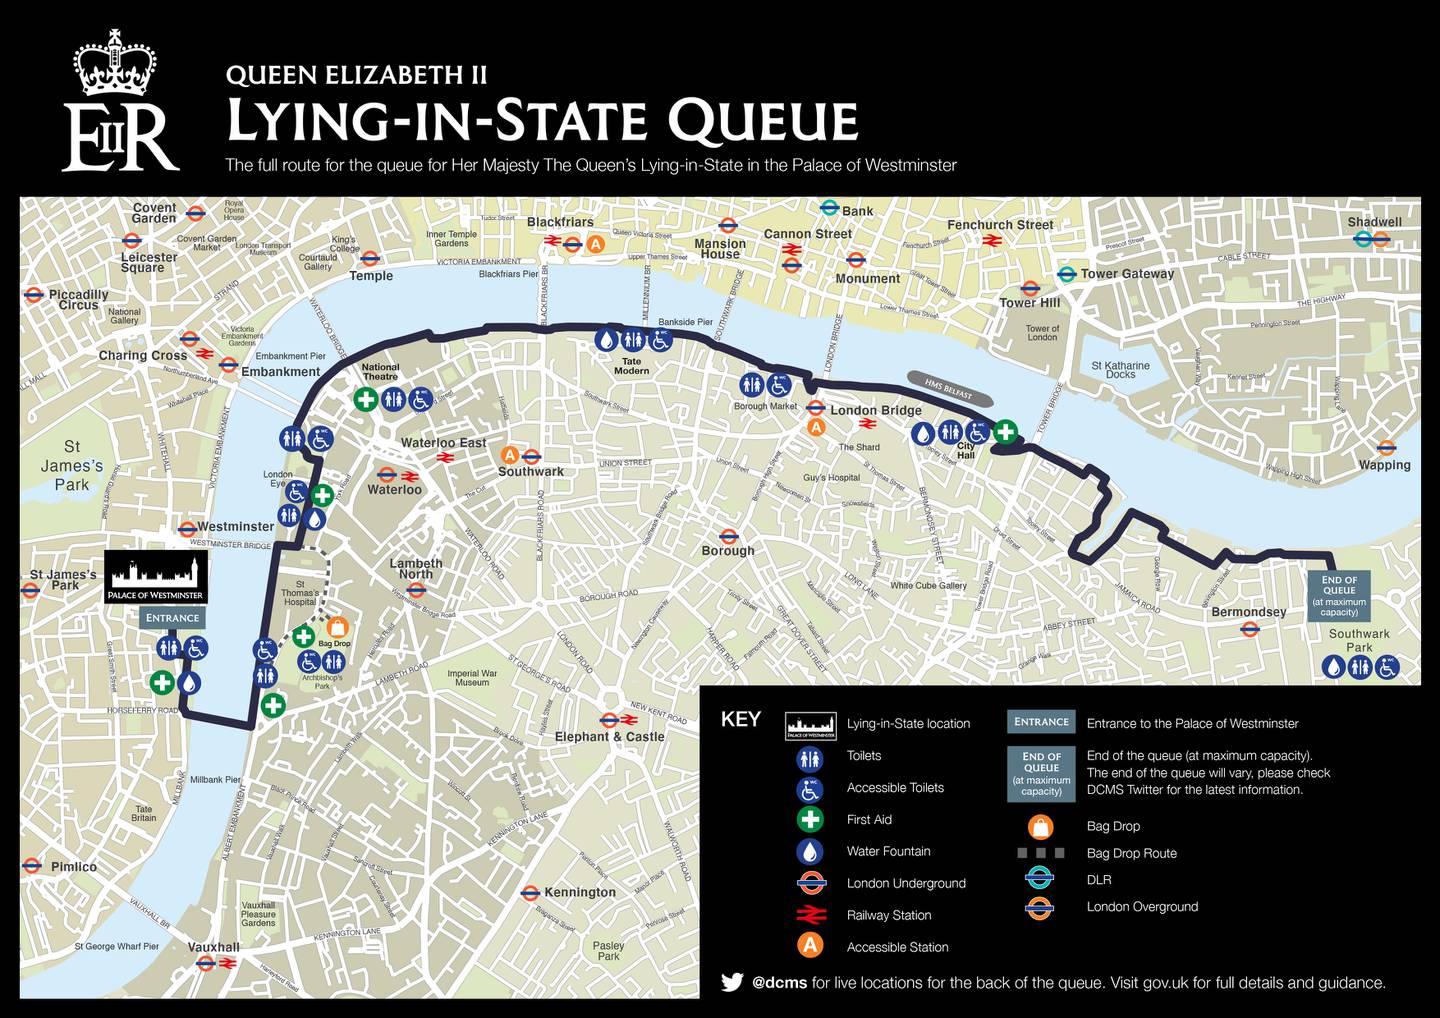 The route for the queue. Photo: UK Government